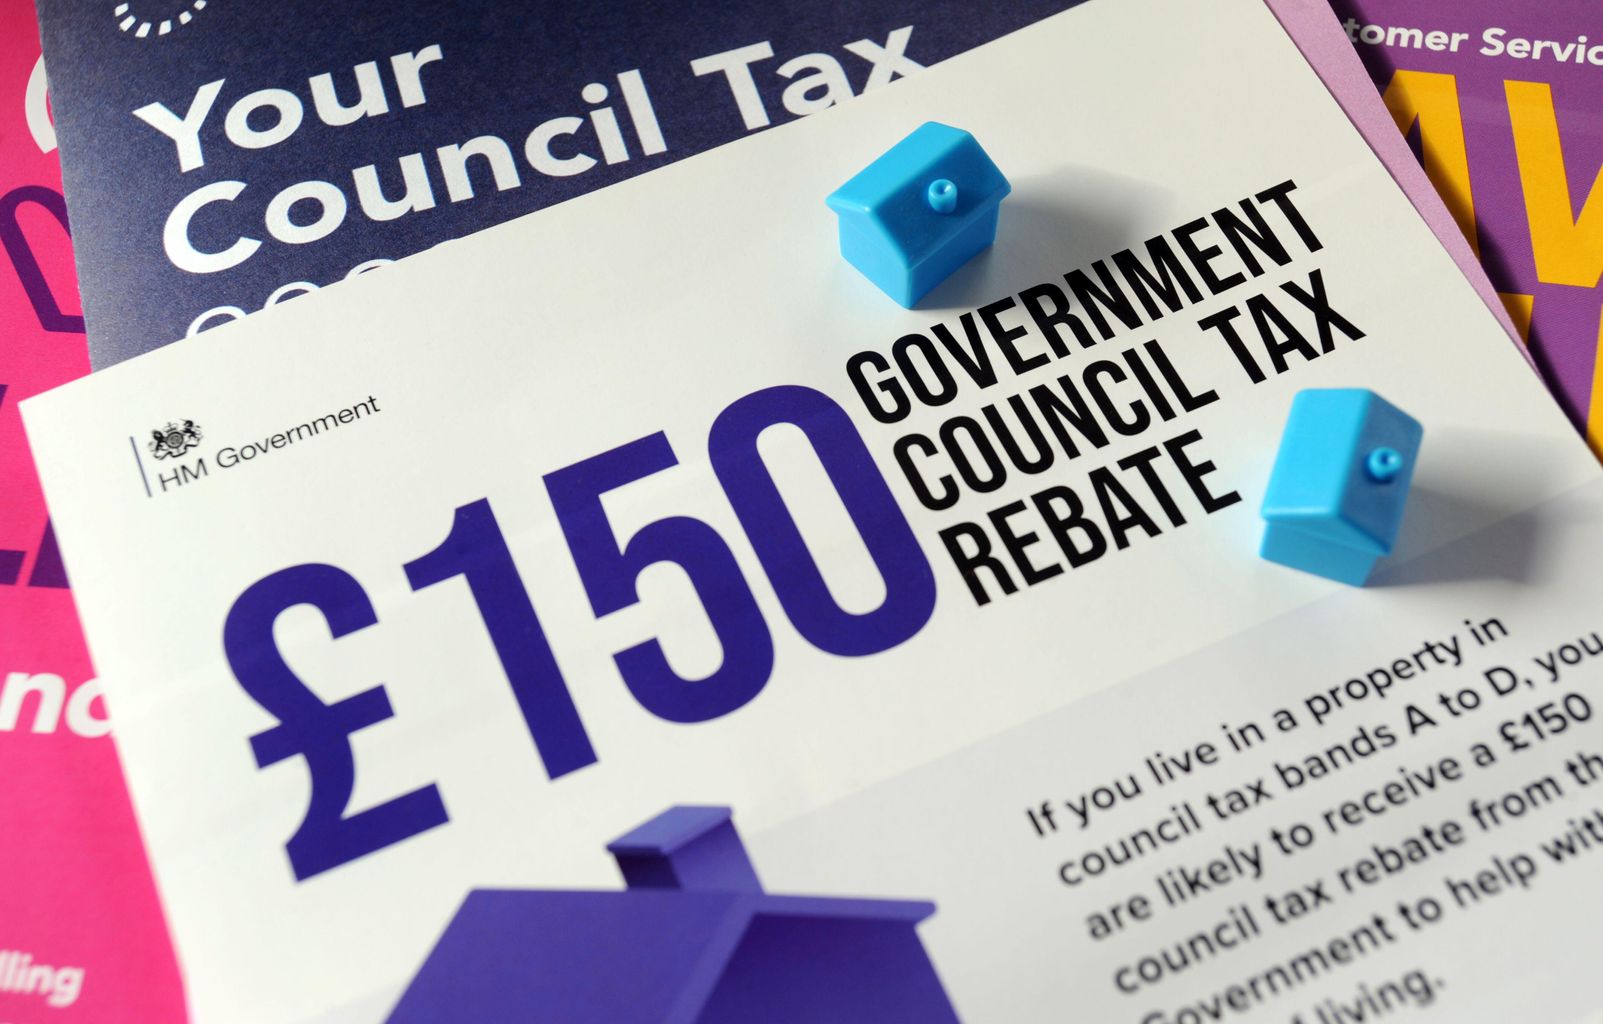 remember-to-apply-for-your-150-council-tax-rebate-by-friday-25th-june-2022